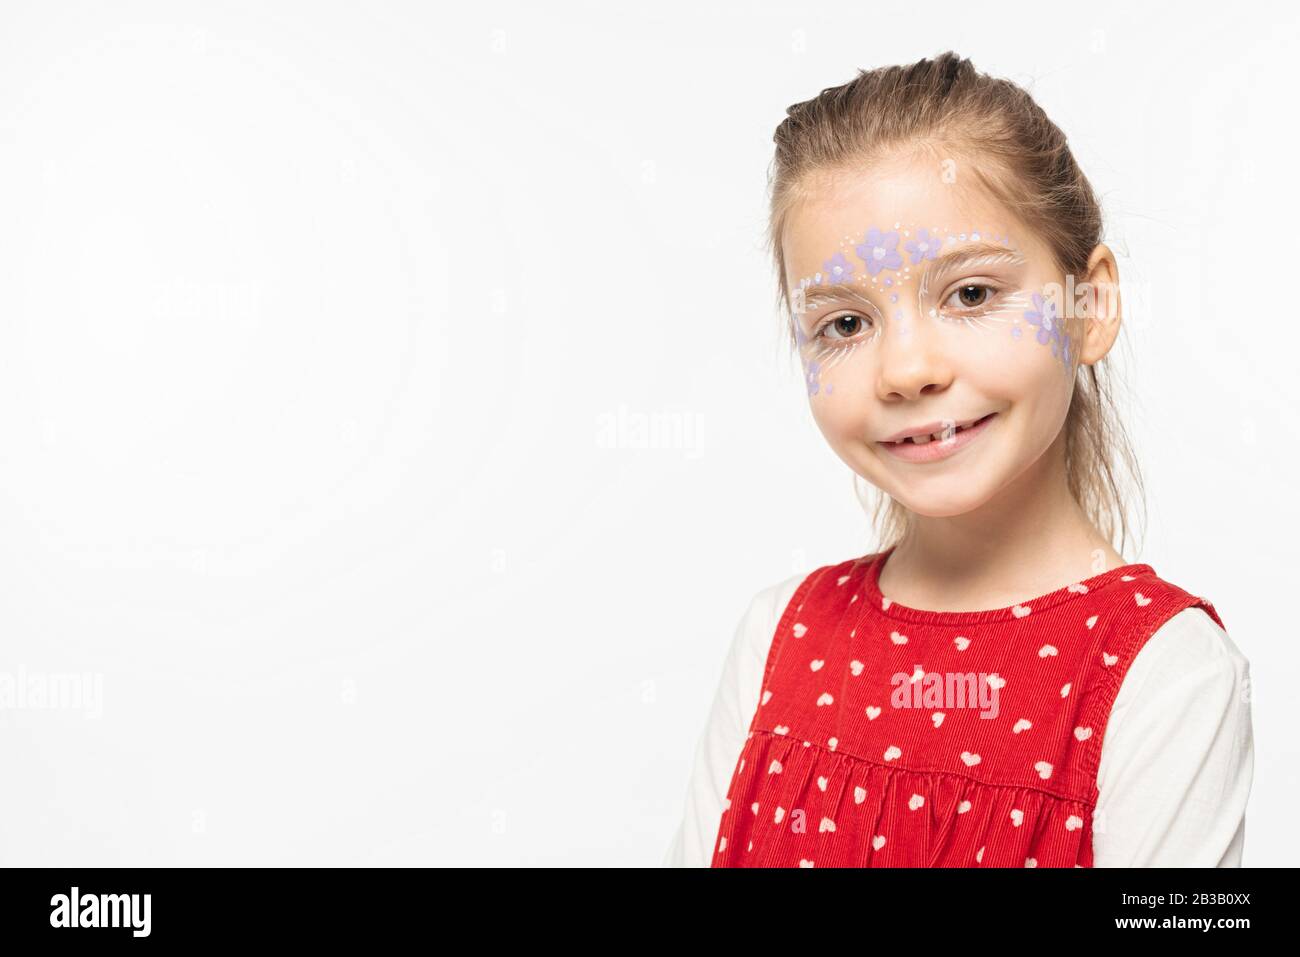 smiling child with floral painting on face looking at camera isolated on white Stock Photo